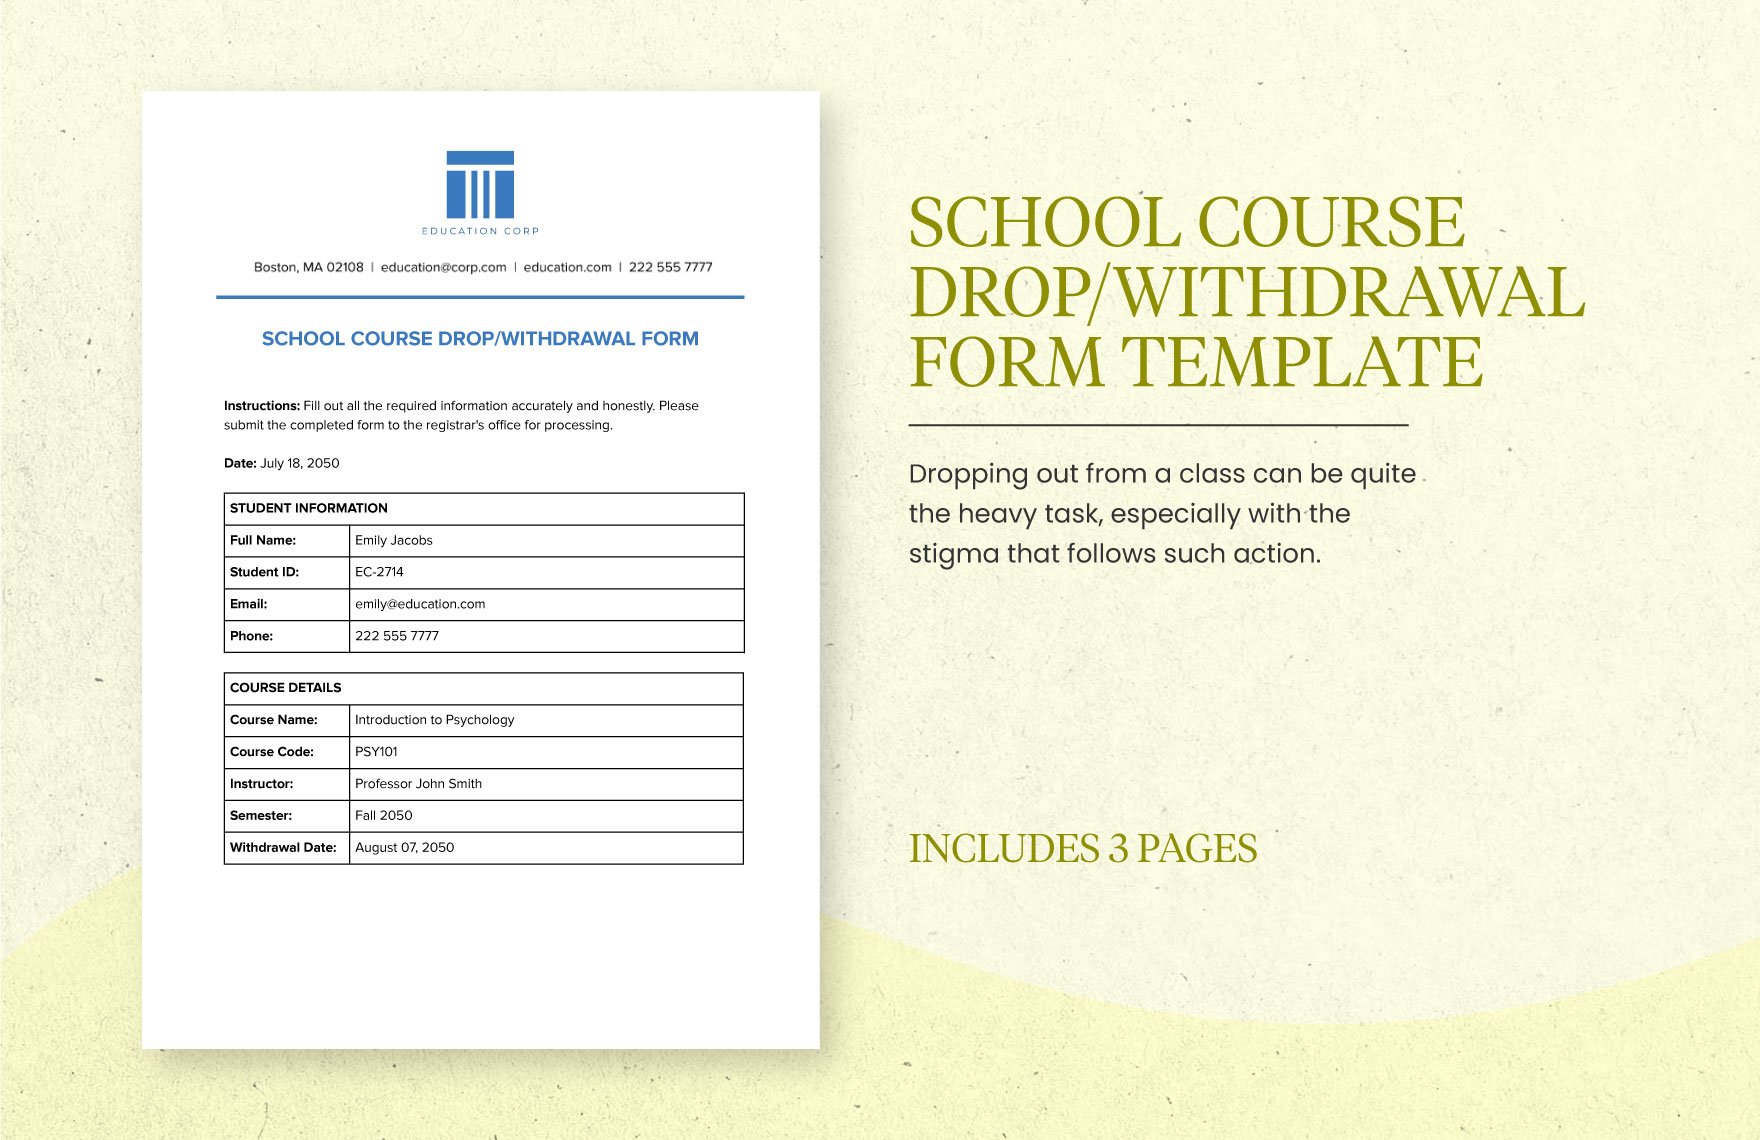 School Course Drop/Withdrawal Form Template